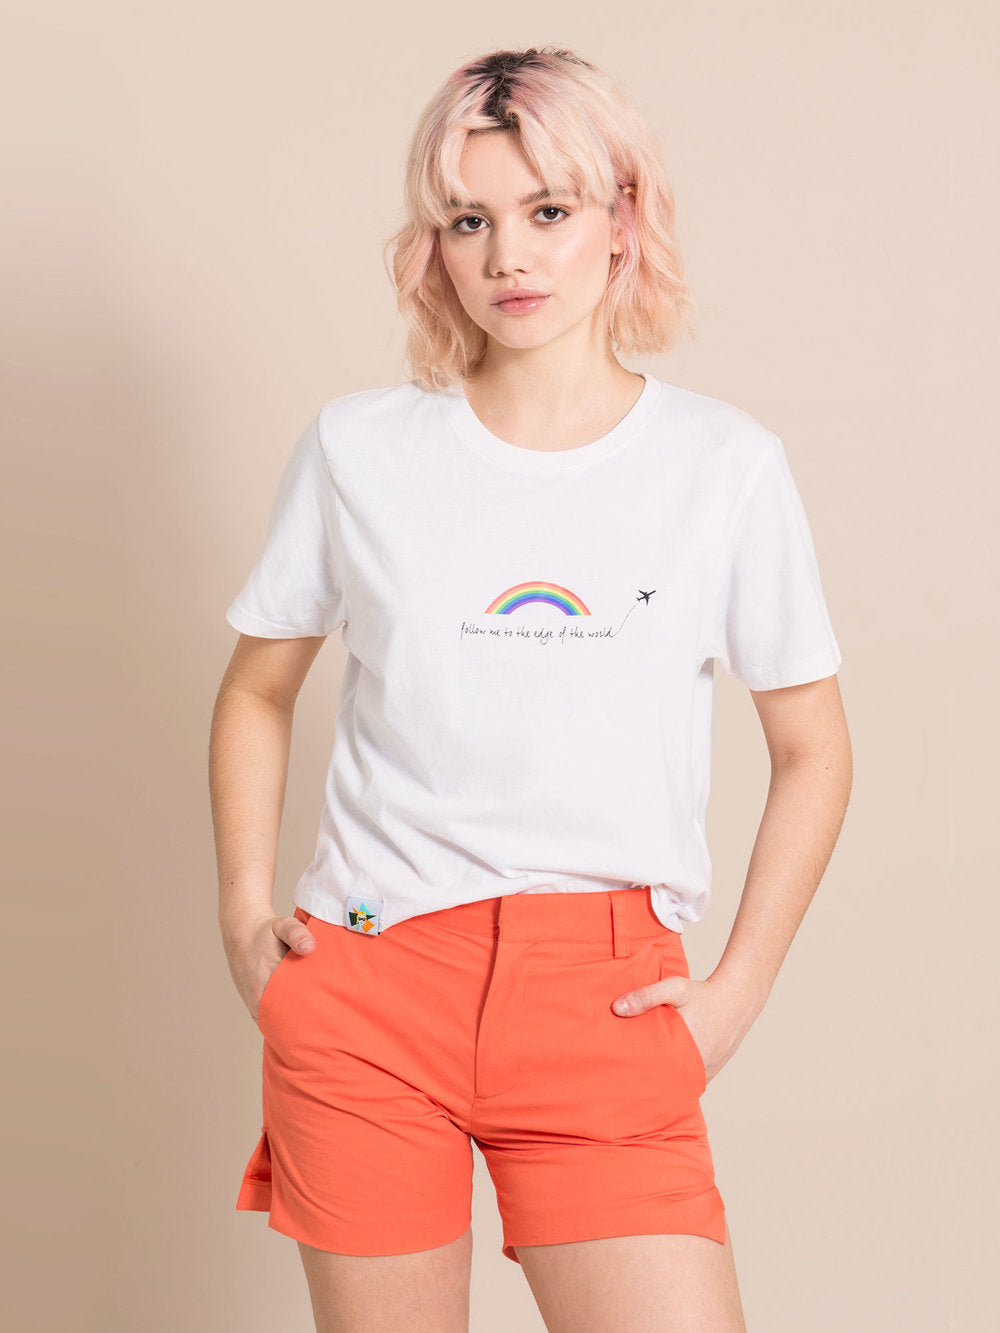 Frontshot of a woman wearing a white tee with print and orange sustainable shorts with crease